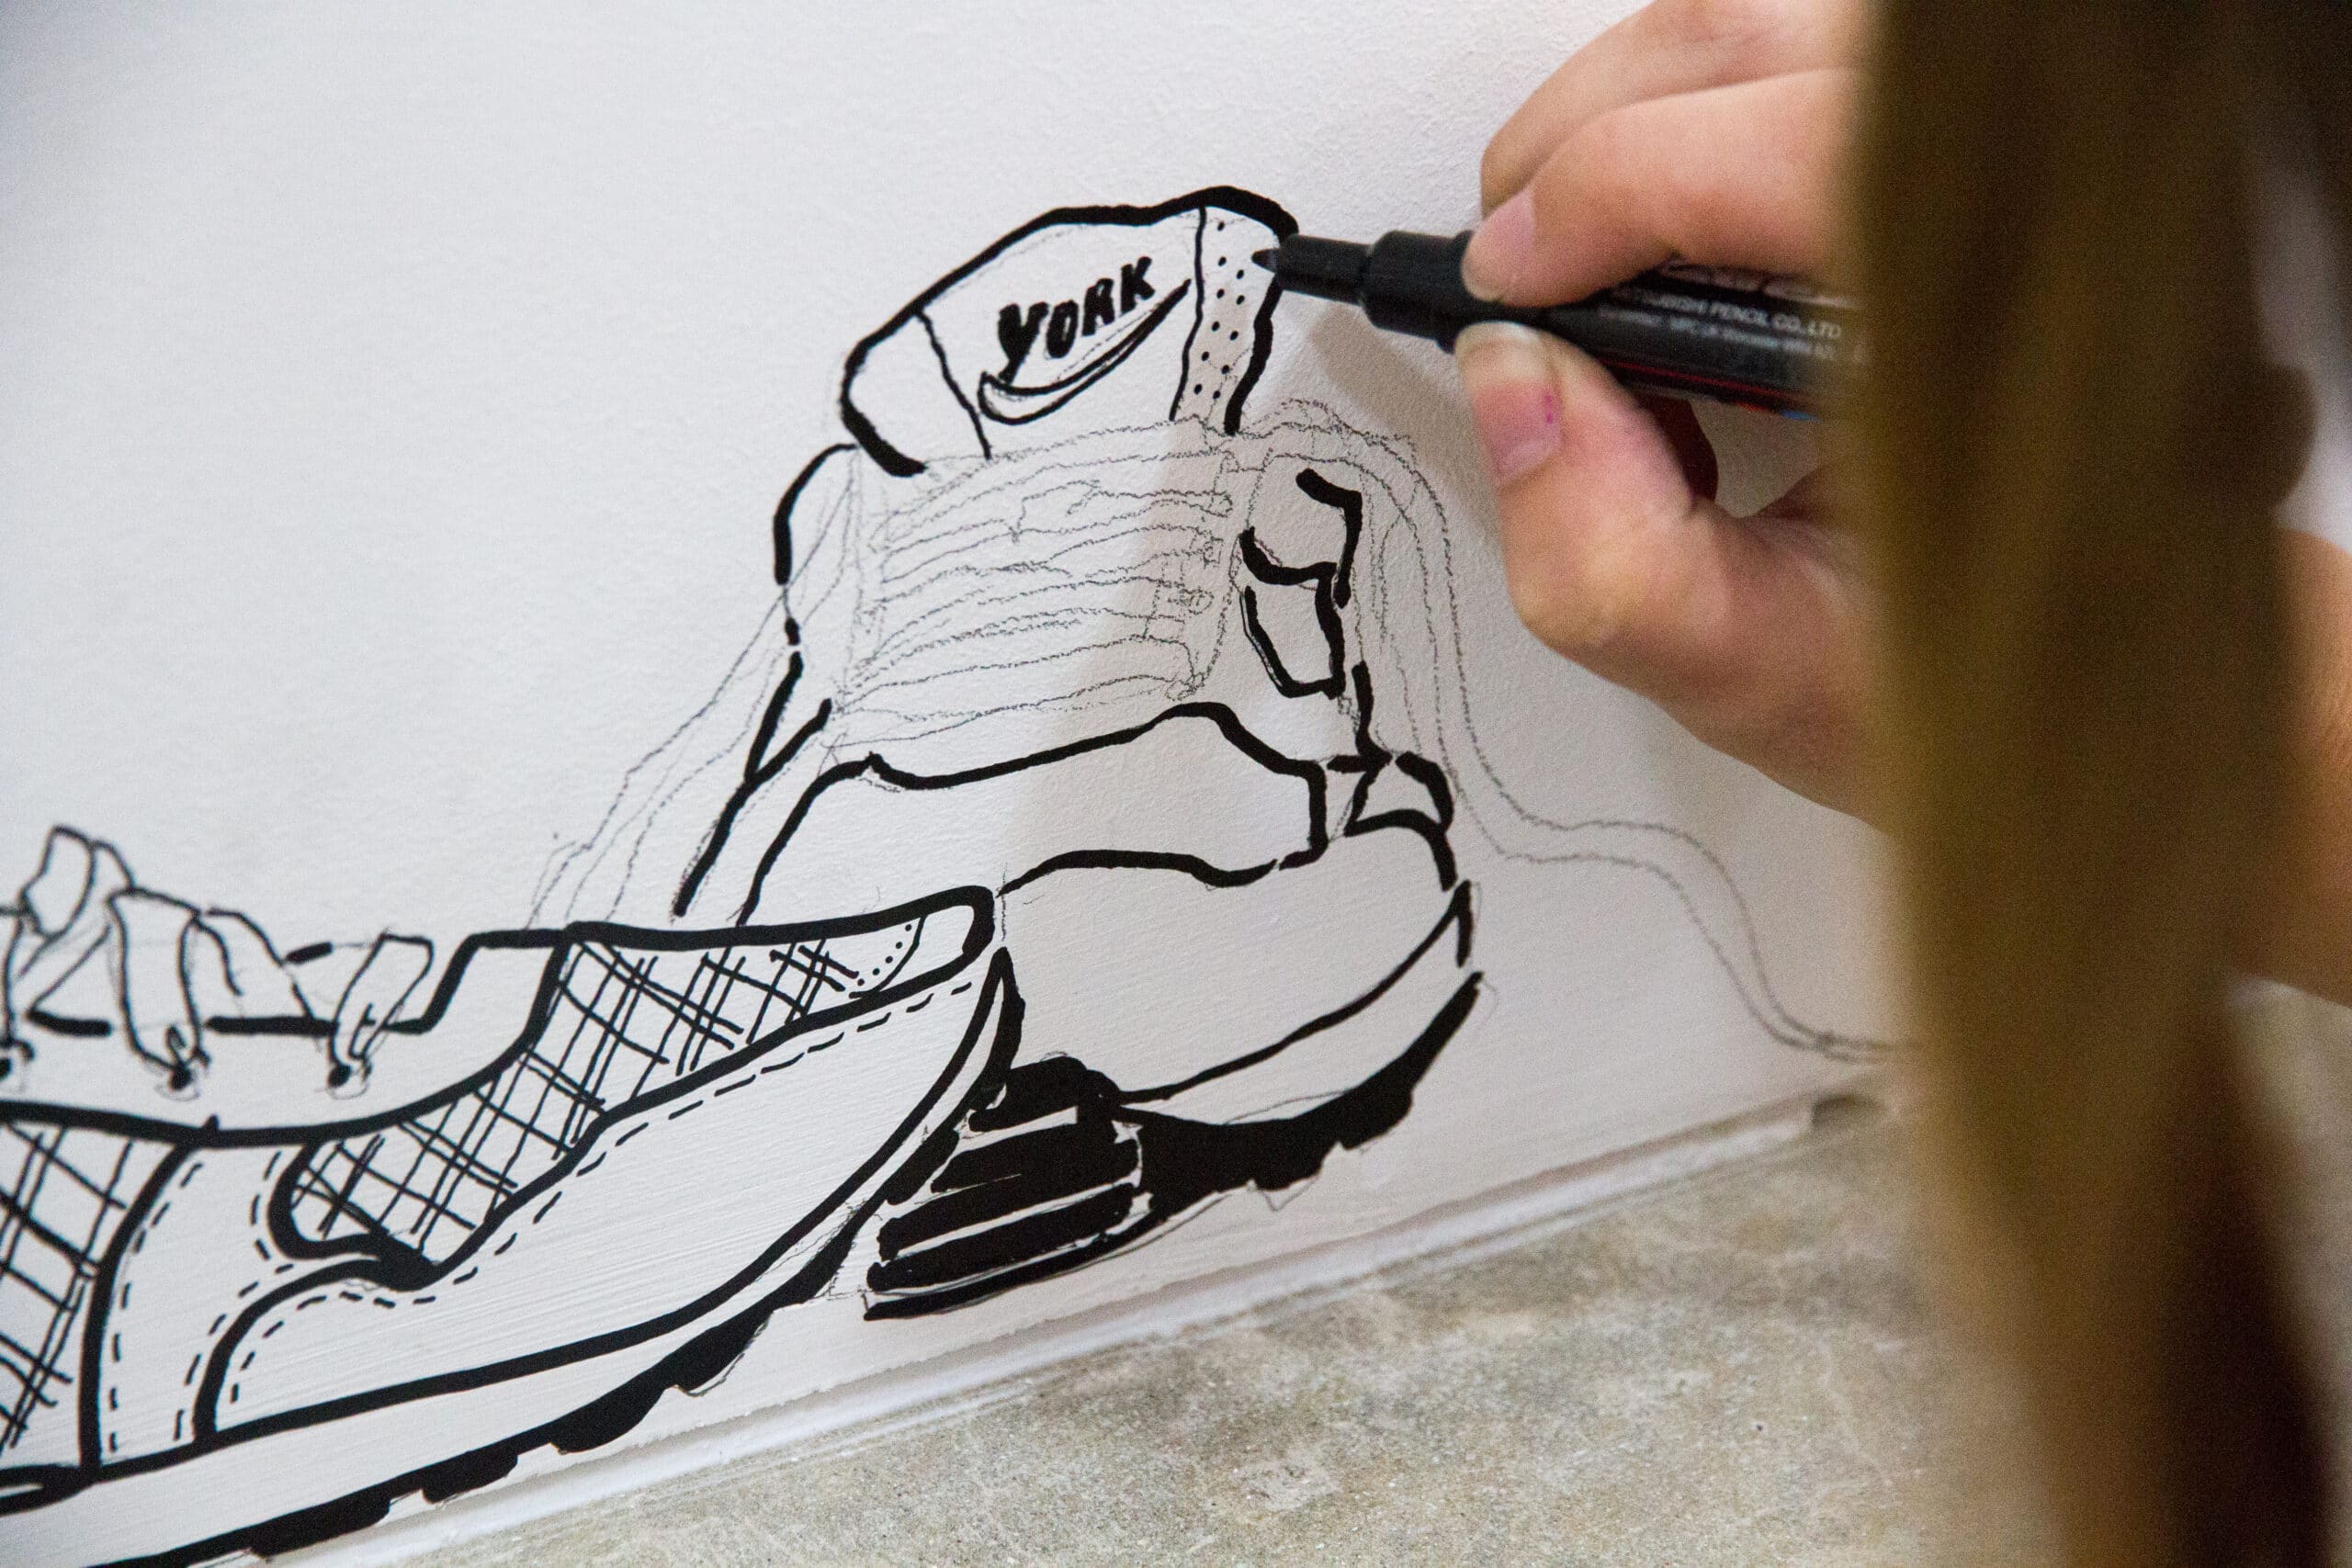 drawing shoes on a wall mural